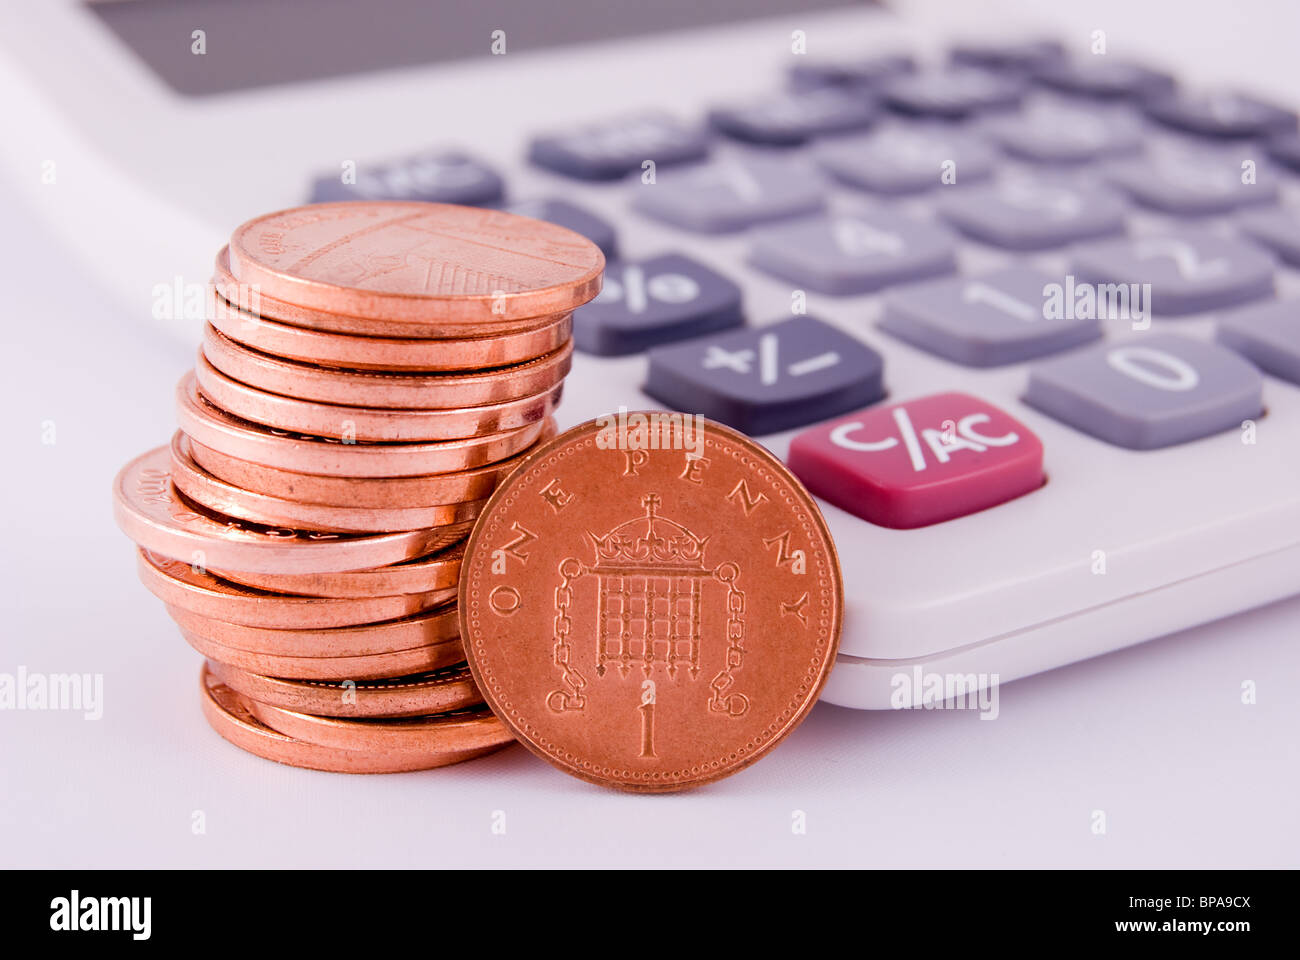 One Pence Coins by a Calculator Stock Photo